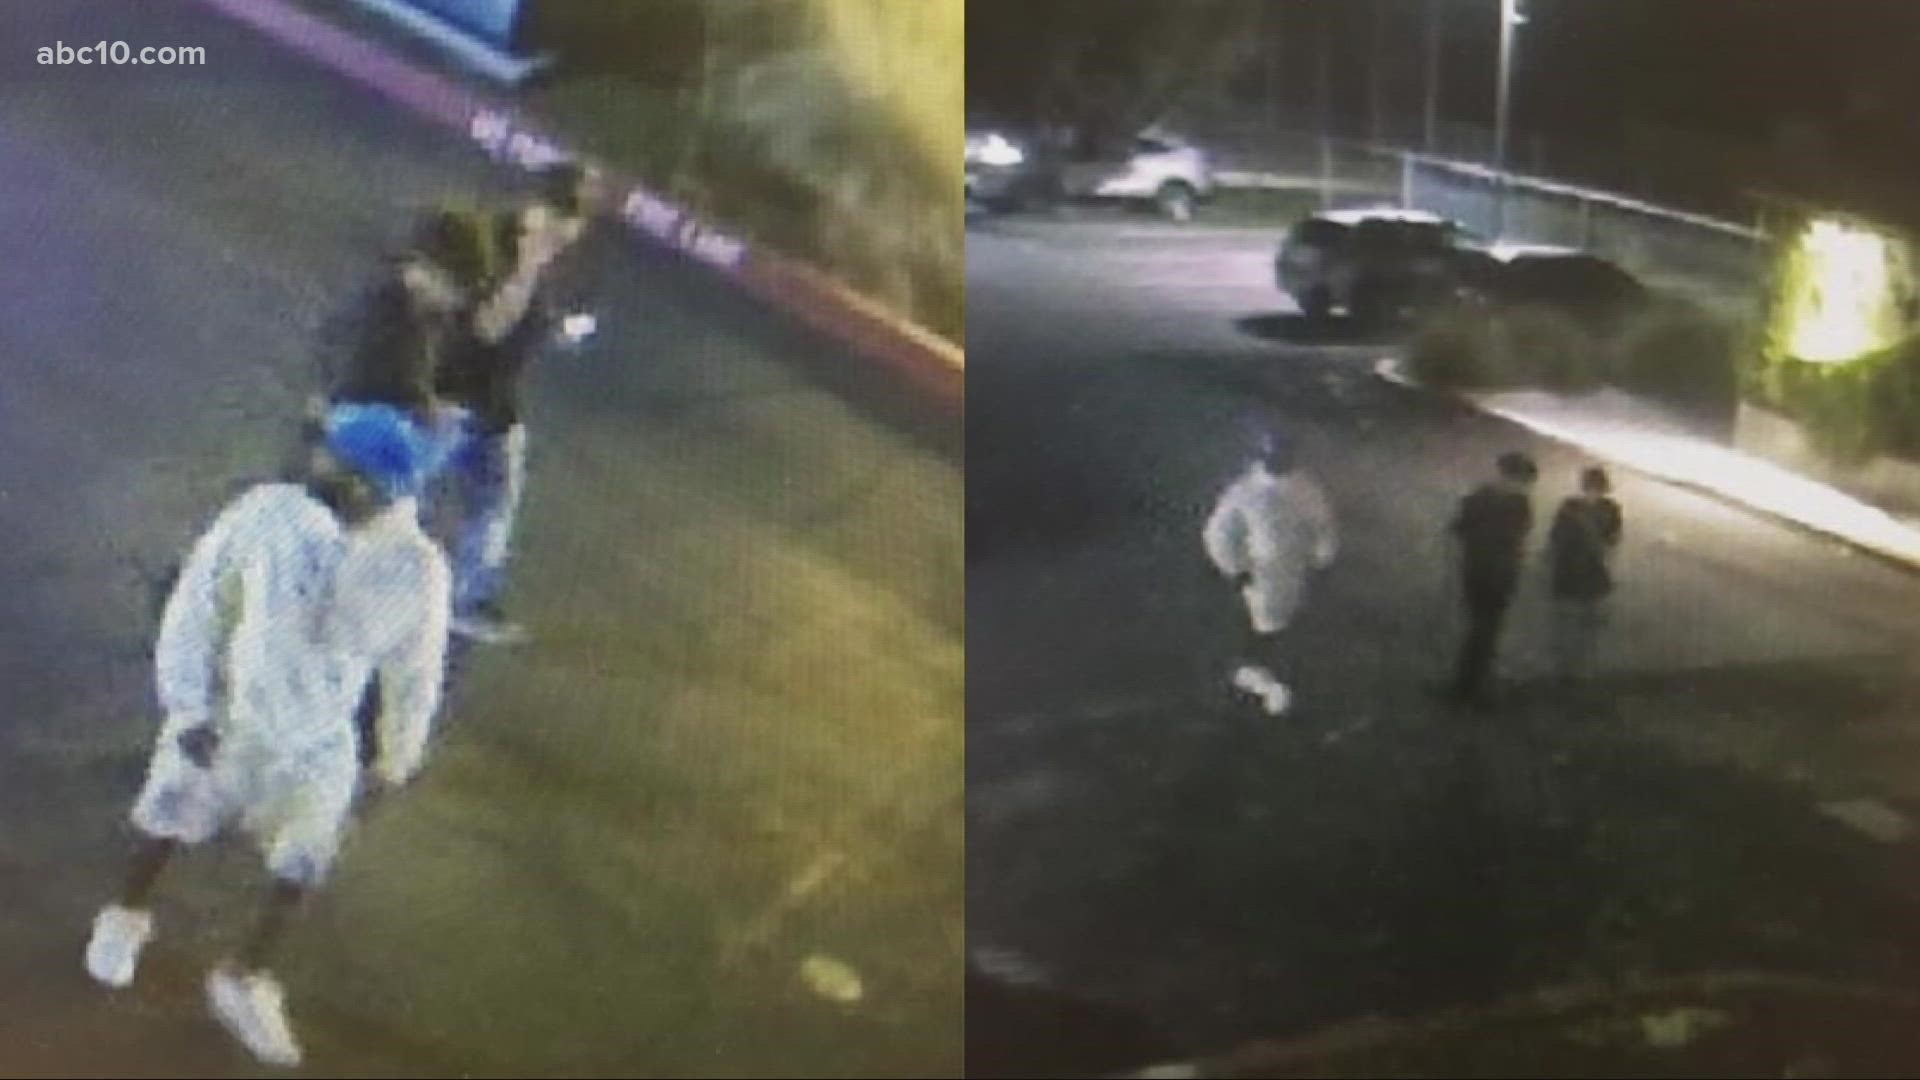 Sacramento police are asking for help after releasing photos of suspects accused of targeting an assistant principal in a hate crime.